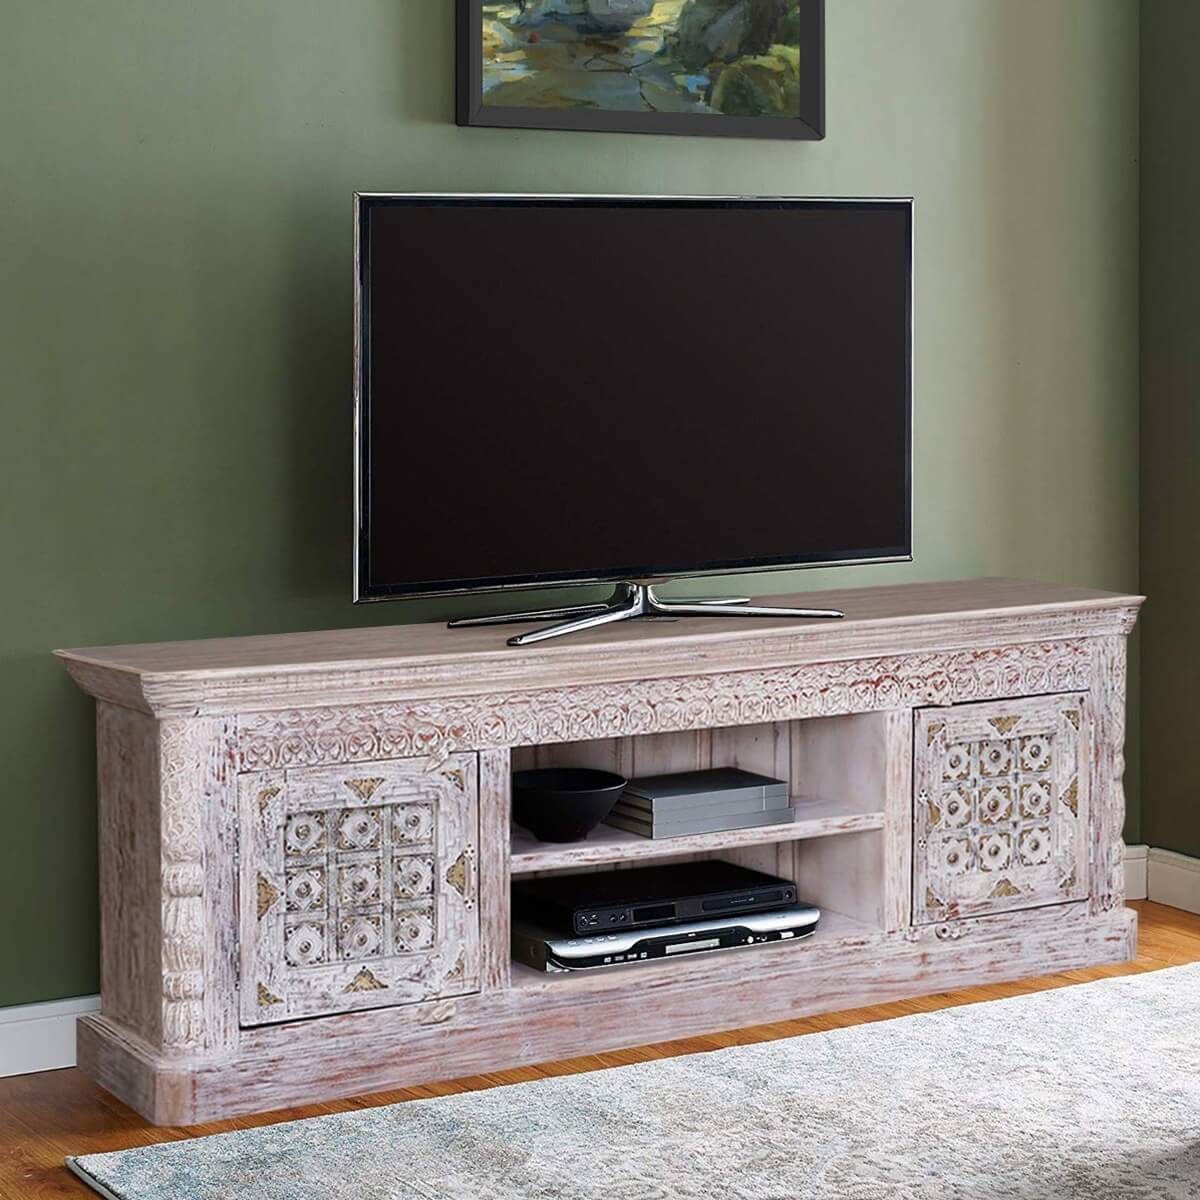 Treytan White Washed Distressed Wood Traditional Tv Stand Inside White Wood Tv Stands (View 3 of 15)